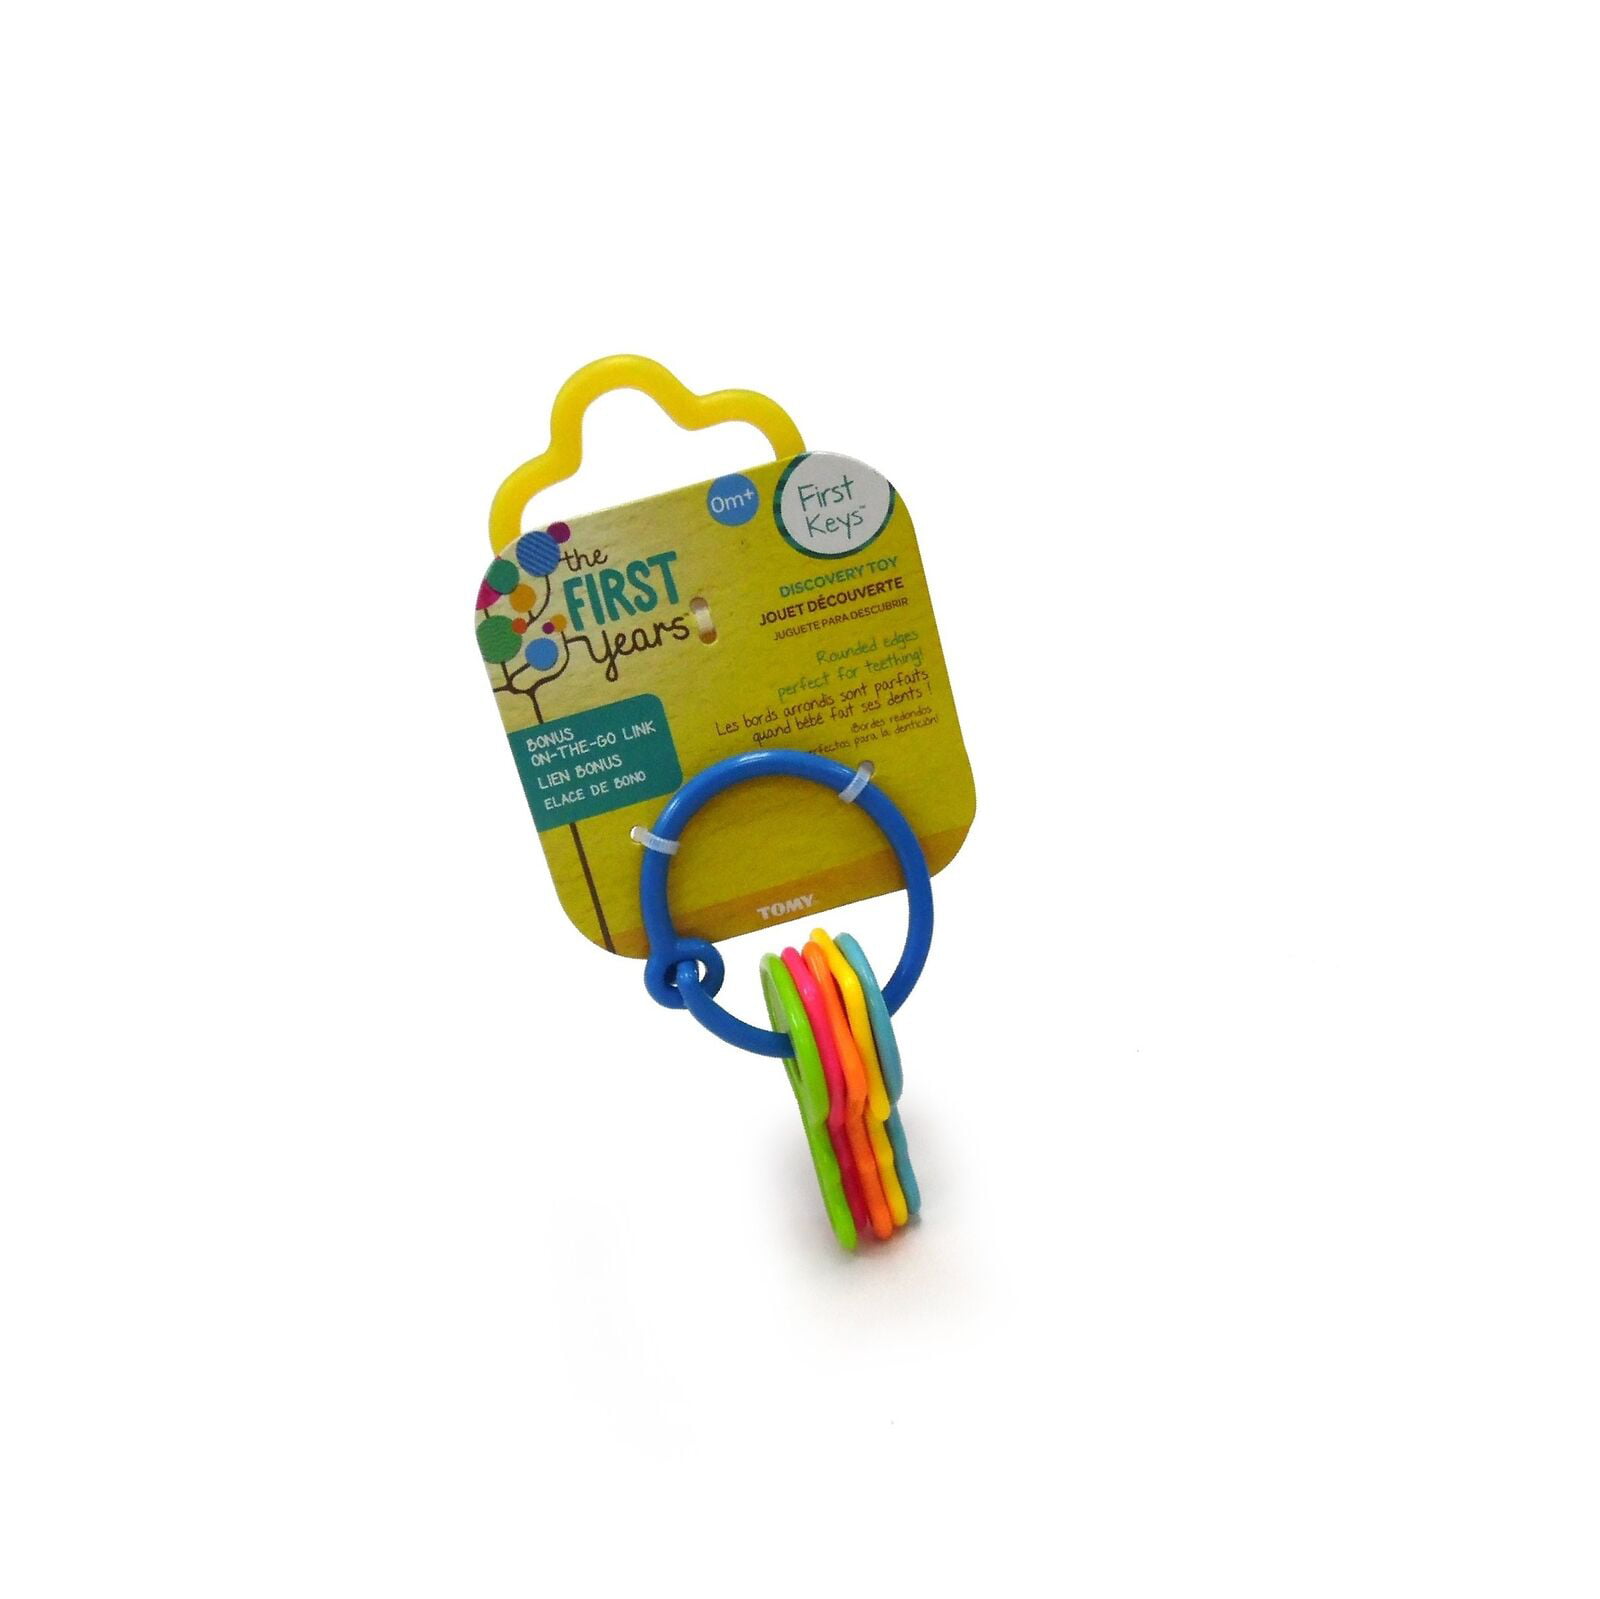 The First Years Learning Curve First Keys Teether 1 ea Pack of 2 